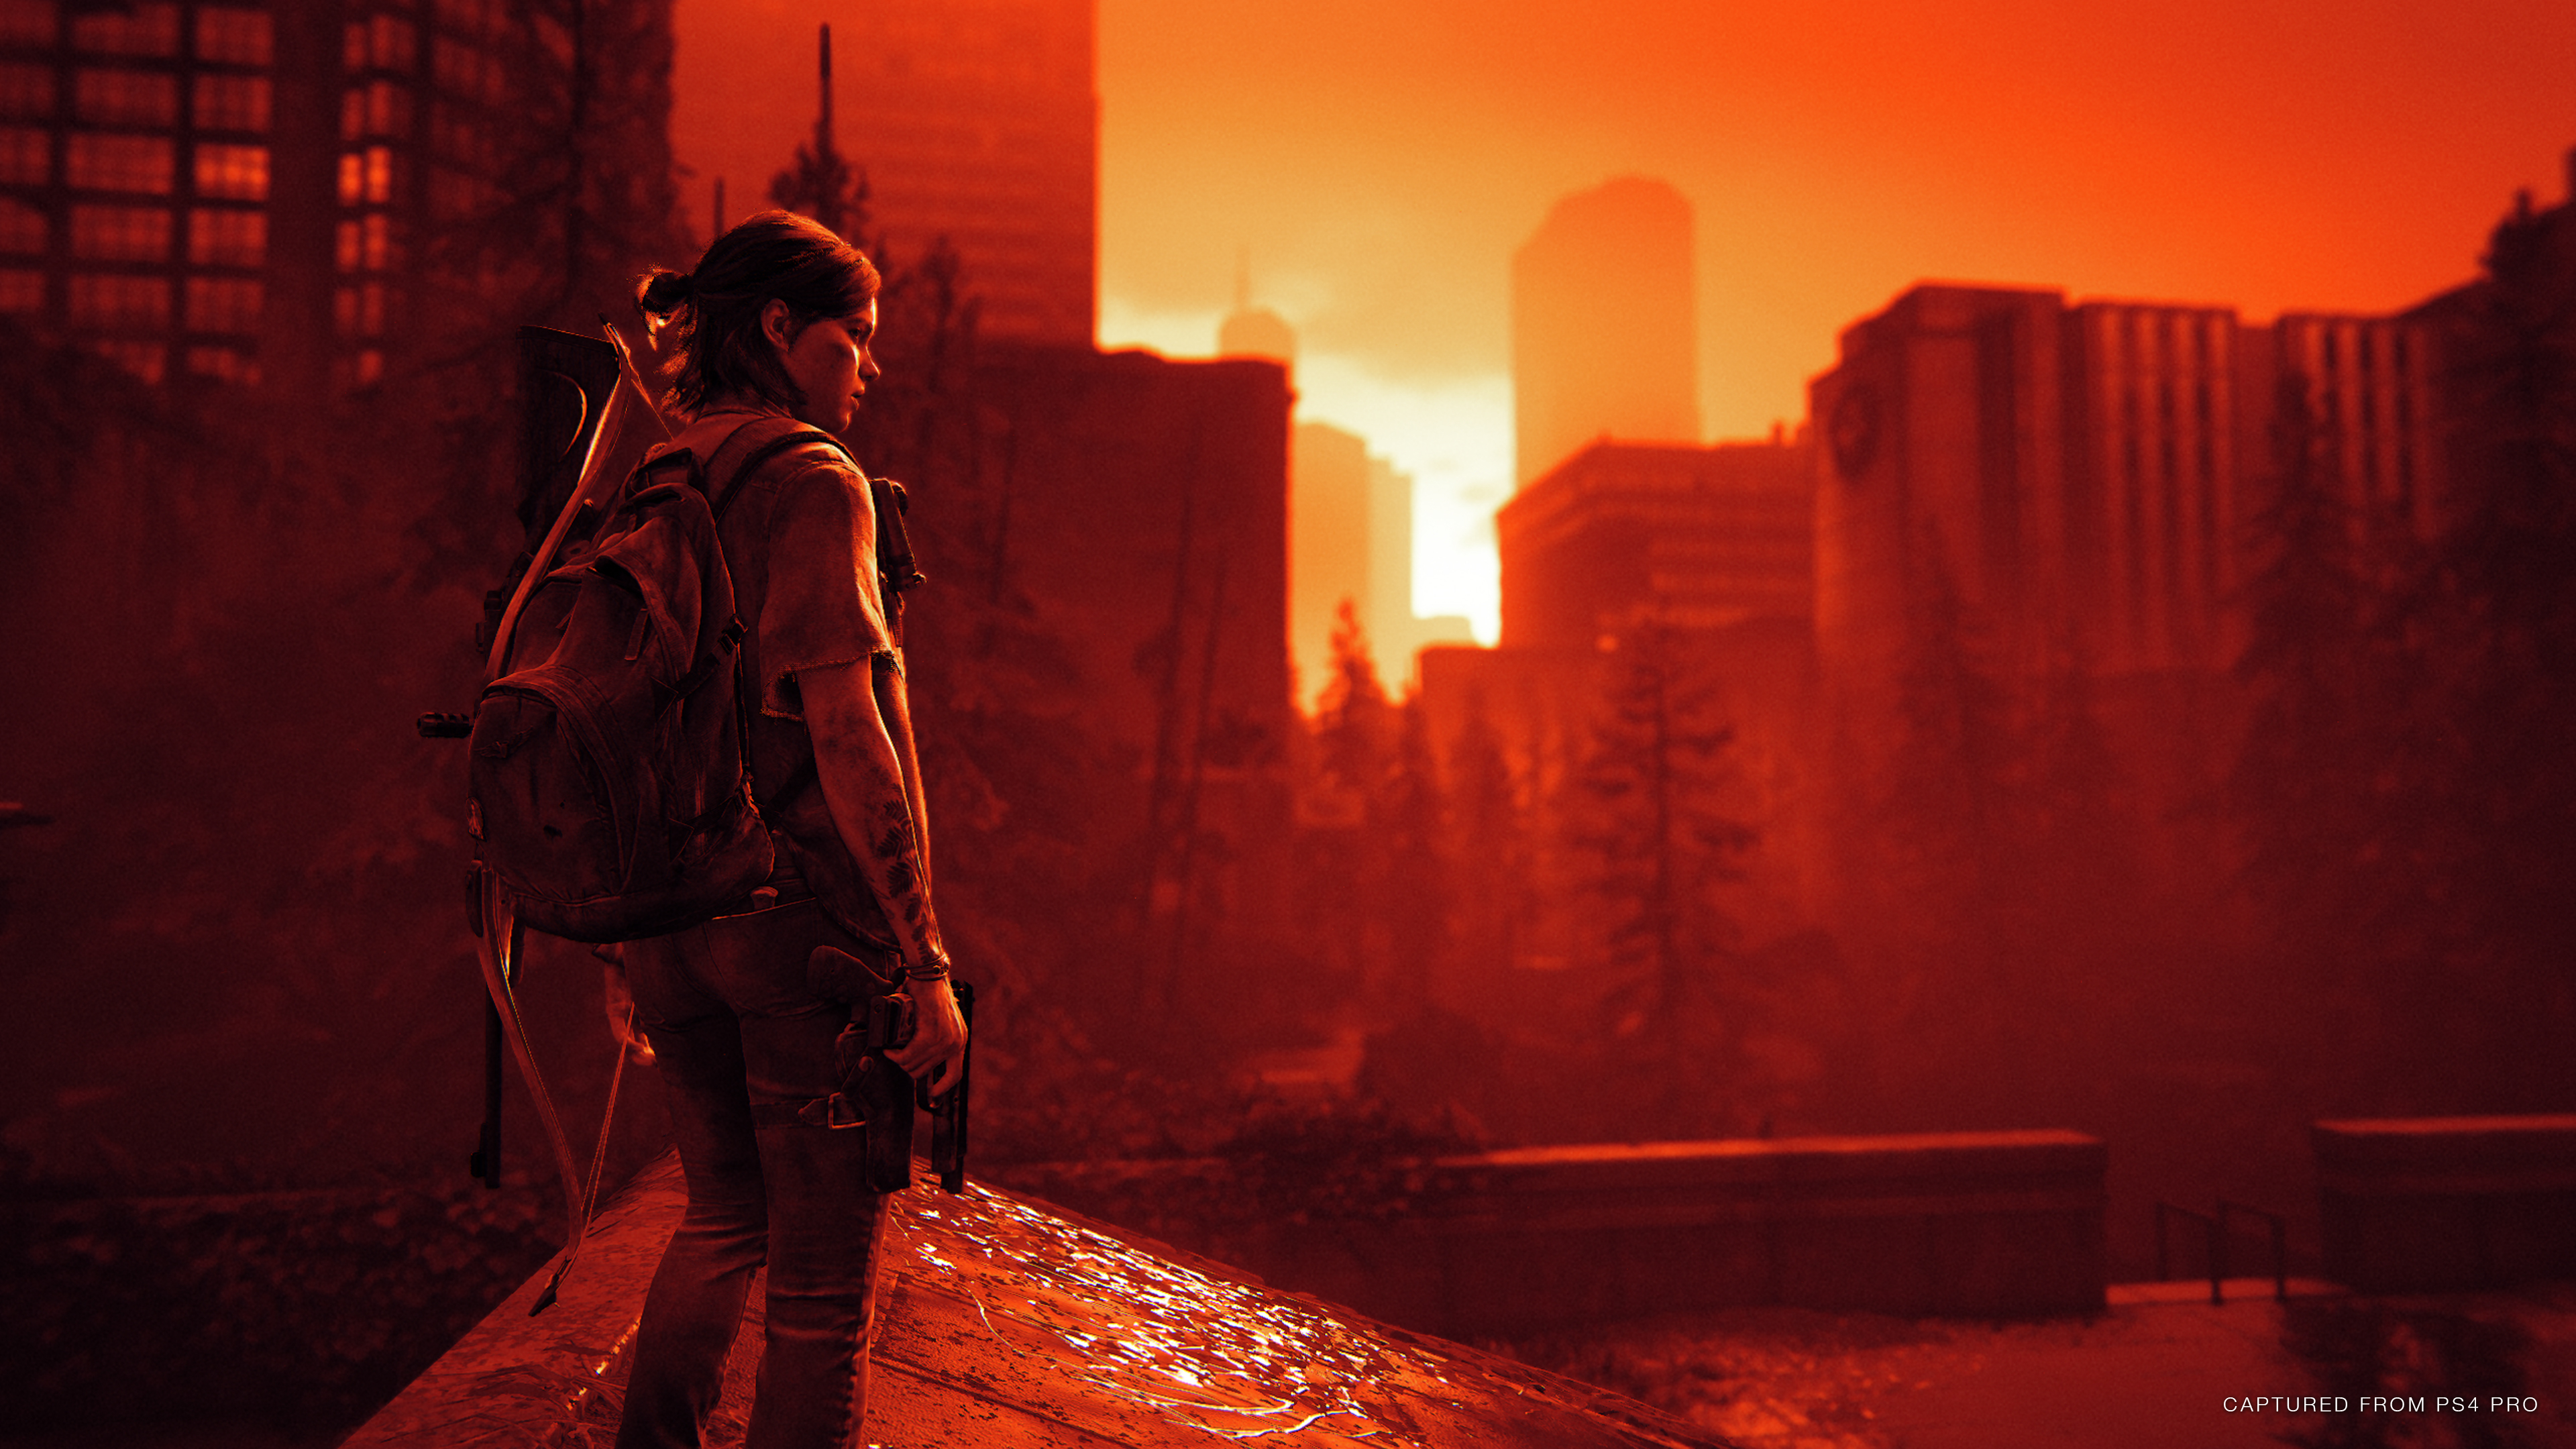 download free the last of us grounded